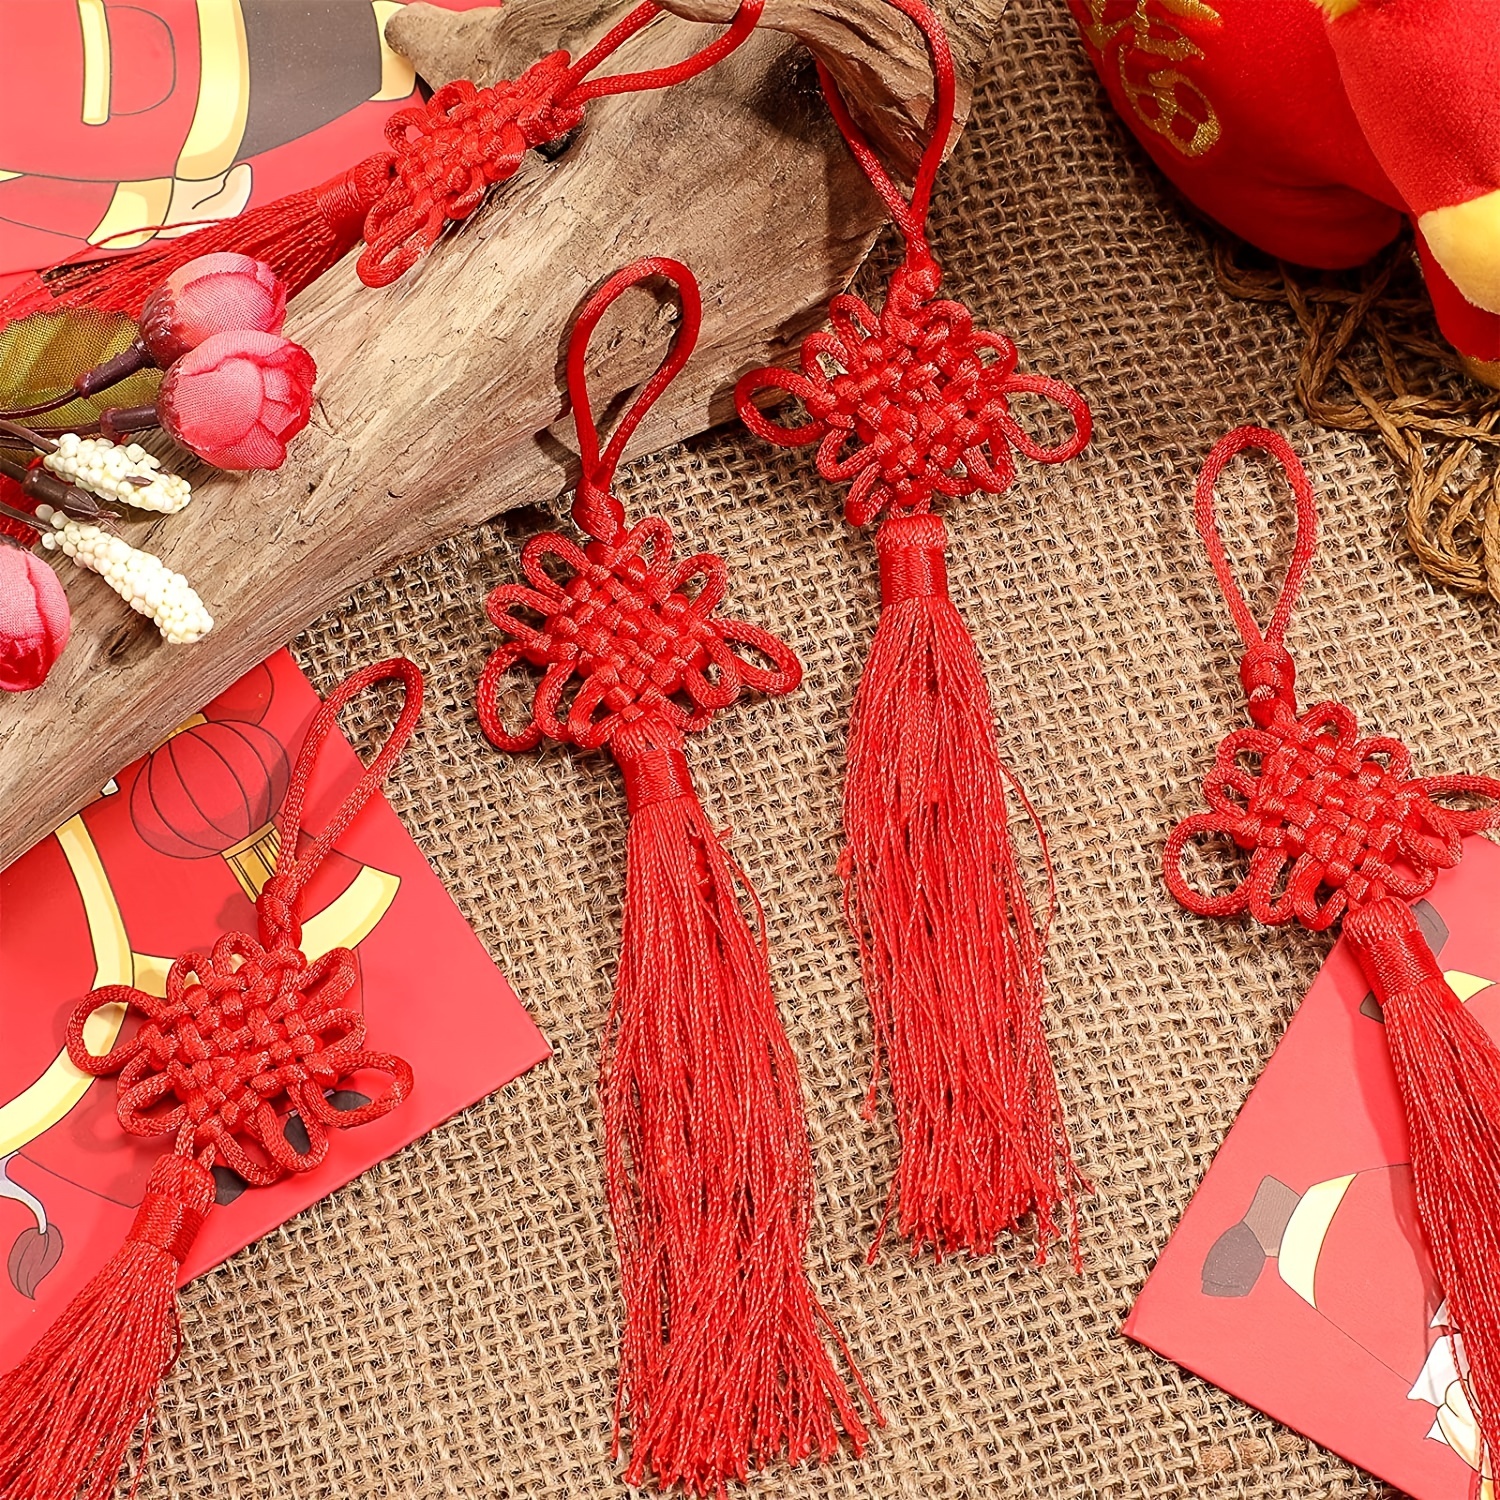 CHENGU 20 Pack Chinese Knot The Fortune Tassel Satin Silk Handmade Chinese Knotting Cord for New Year's Gifts, Chinese Spring Festival and Home Decor